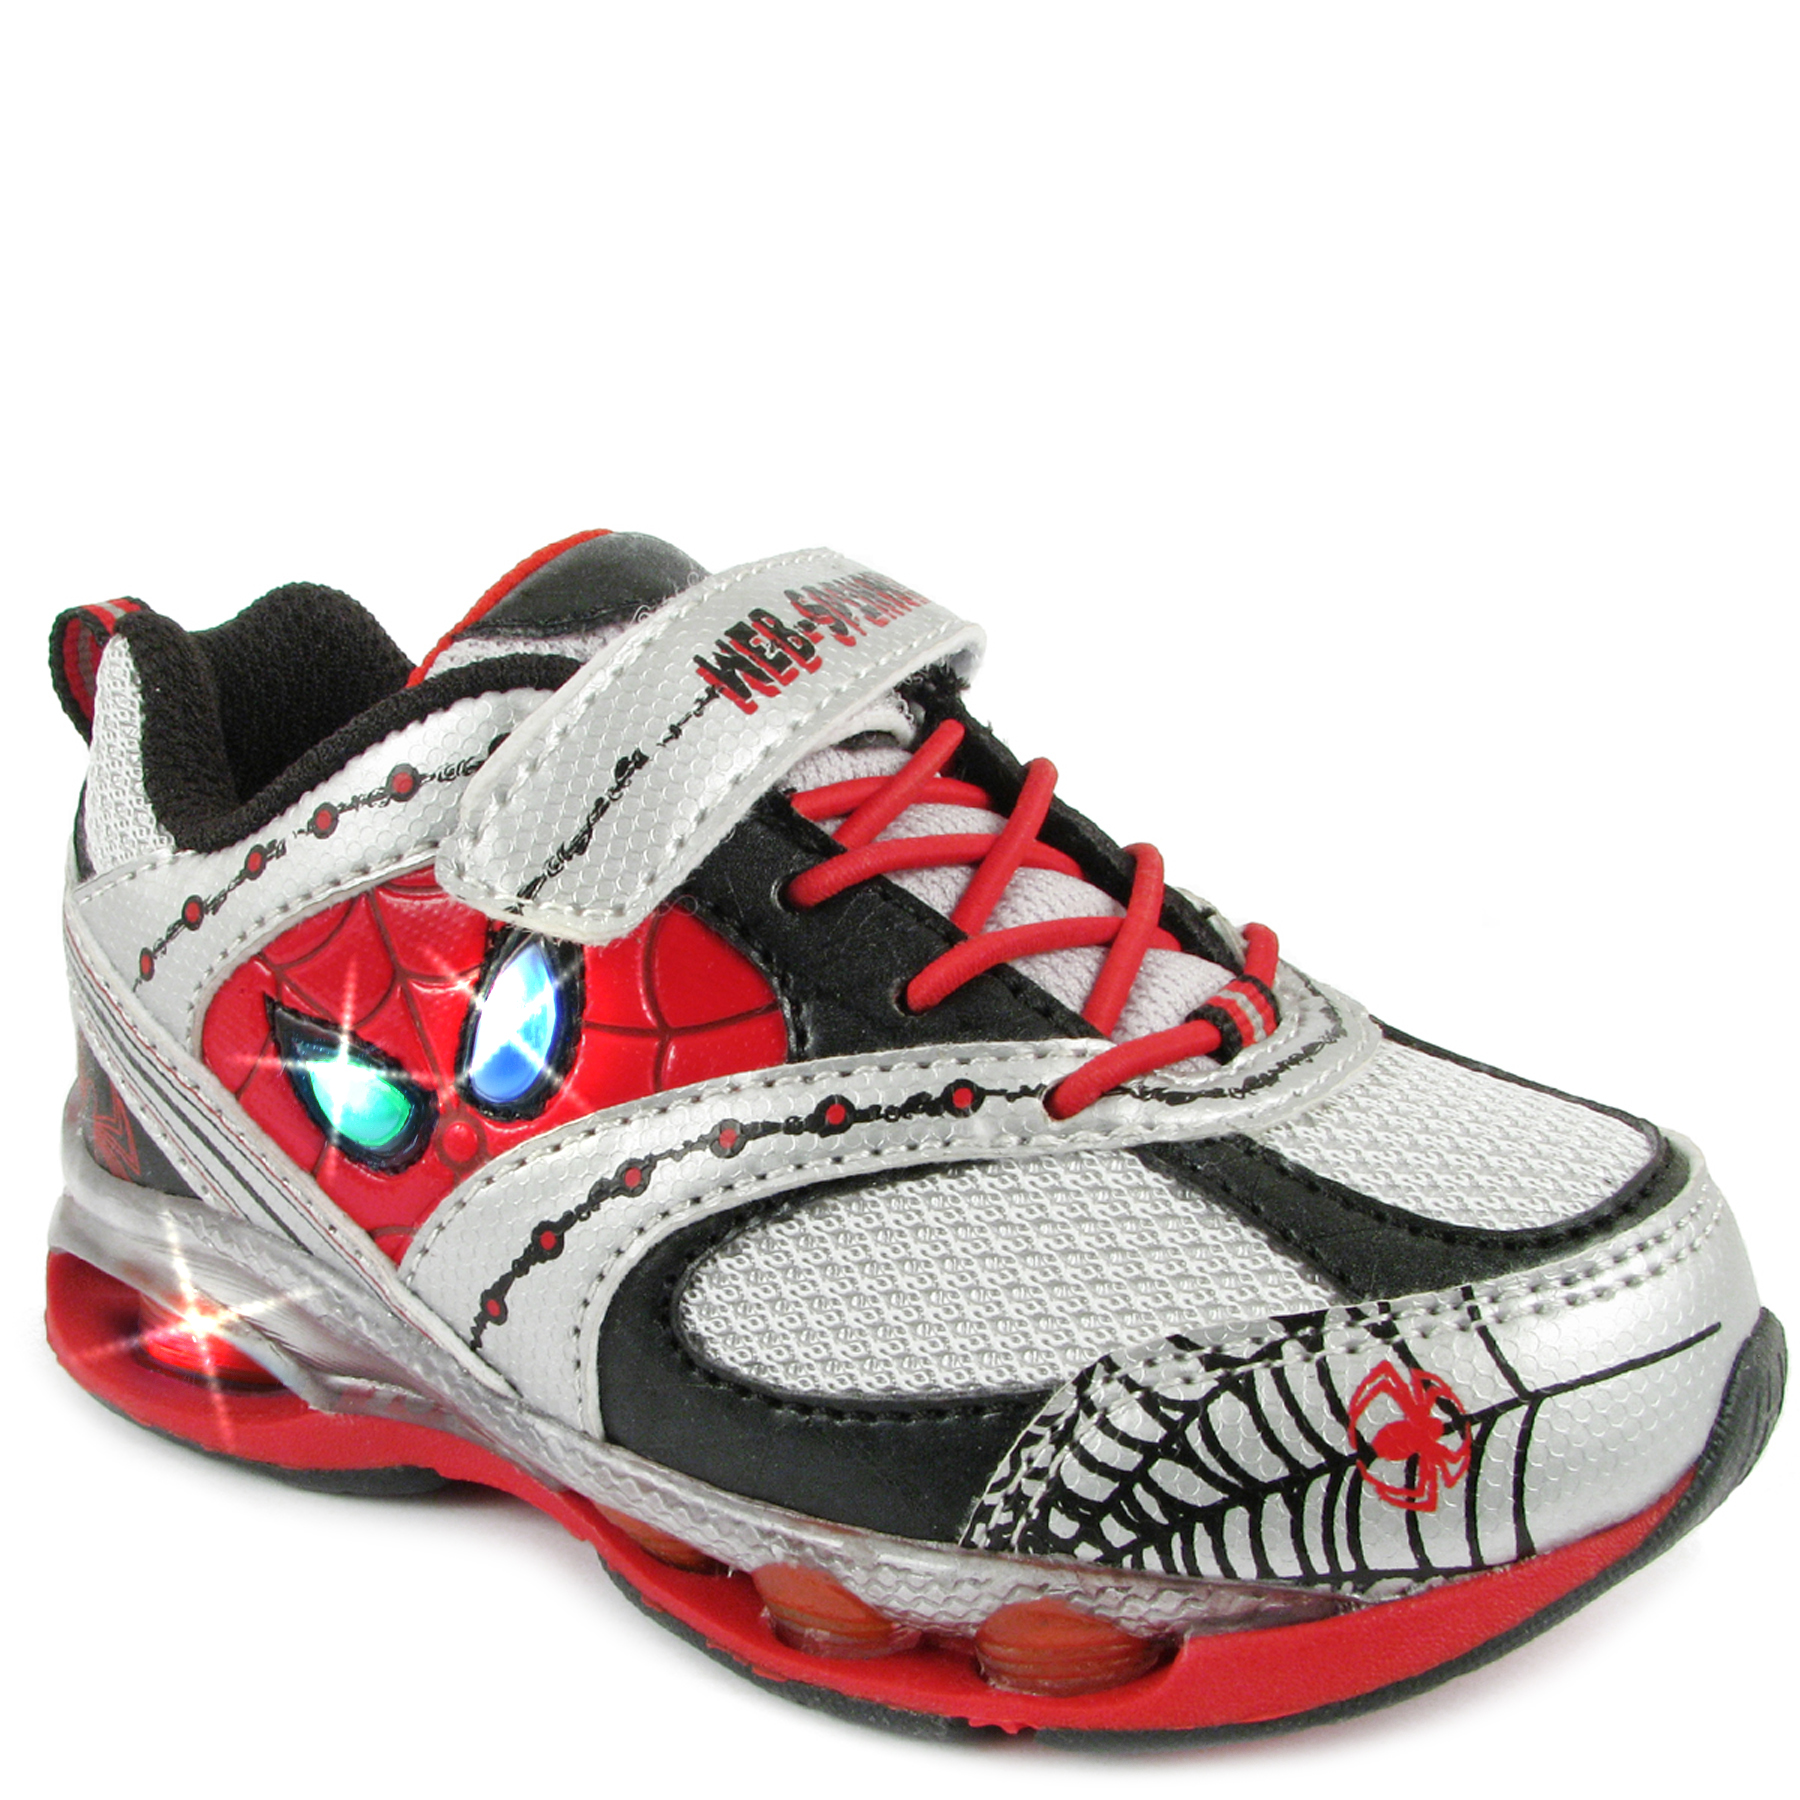 Character Toddler Boy's Spiderman Athletic Shoe - White/Black/Red